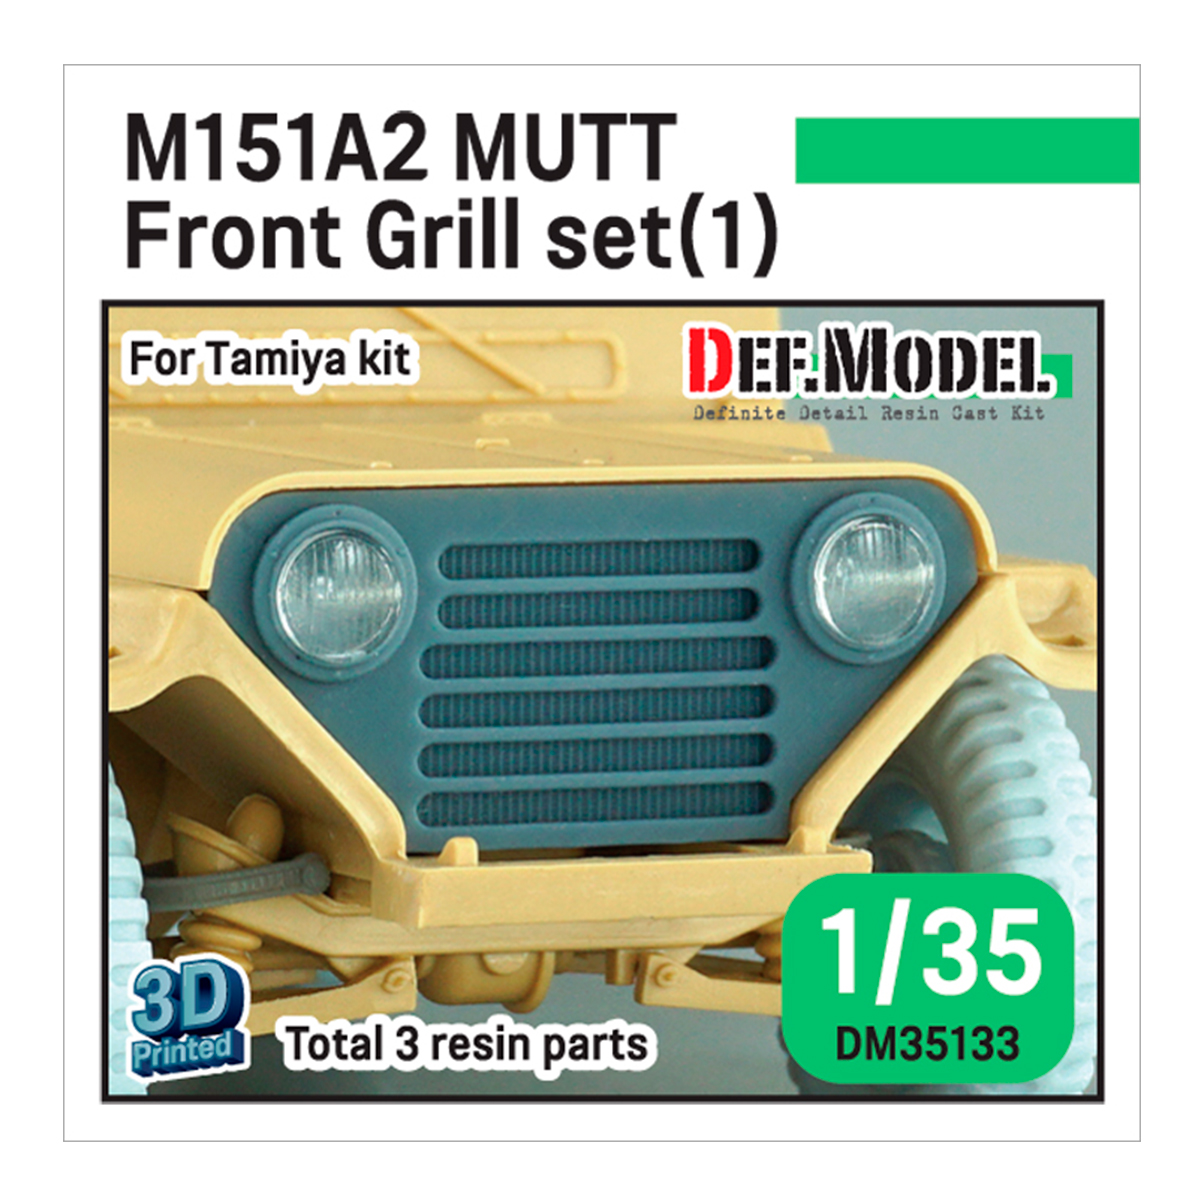 Modern US M151A2 Mutt front grill set (1) (for 1/35 Tamiya kit)